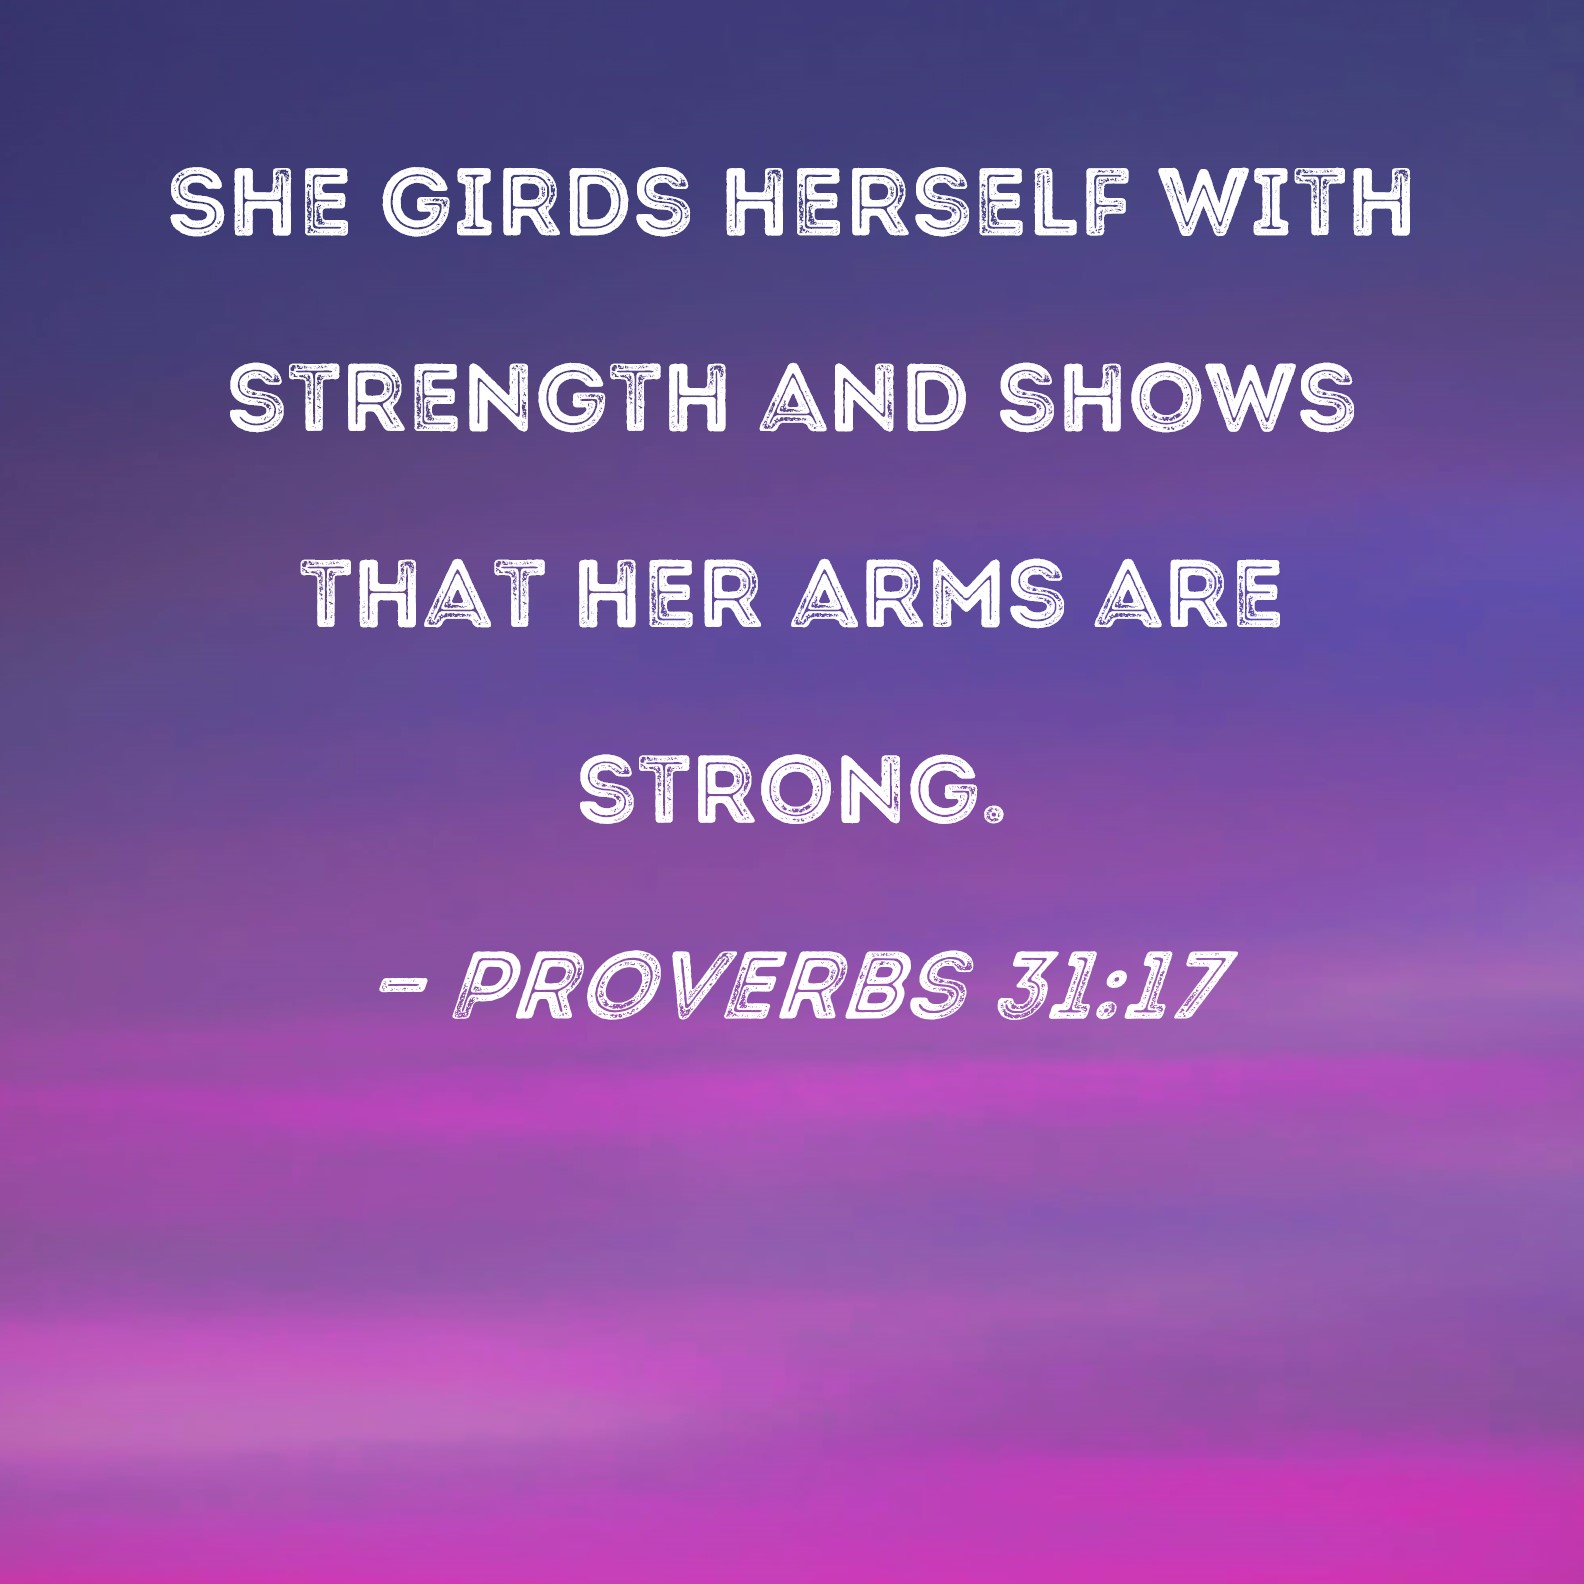 proverbs-31-17-she-girds-herself-with-strength-and-shows-that-her-arms